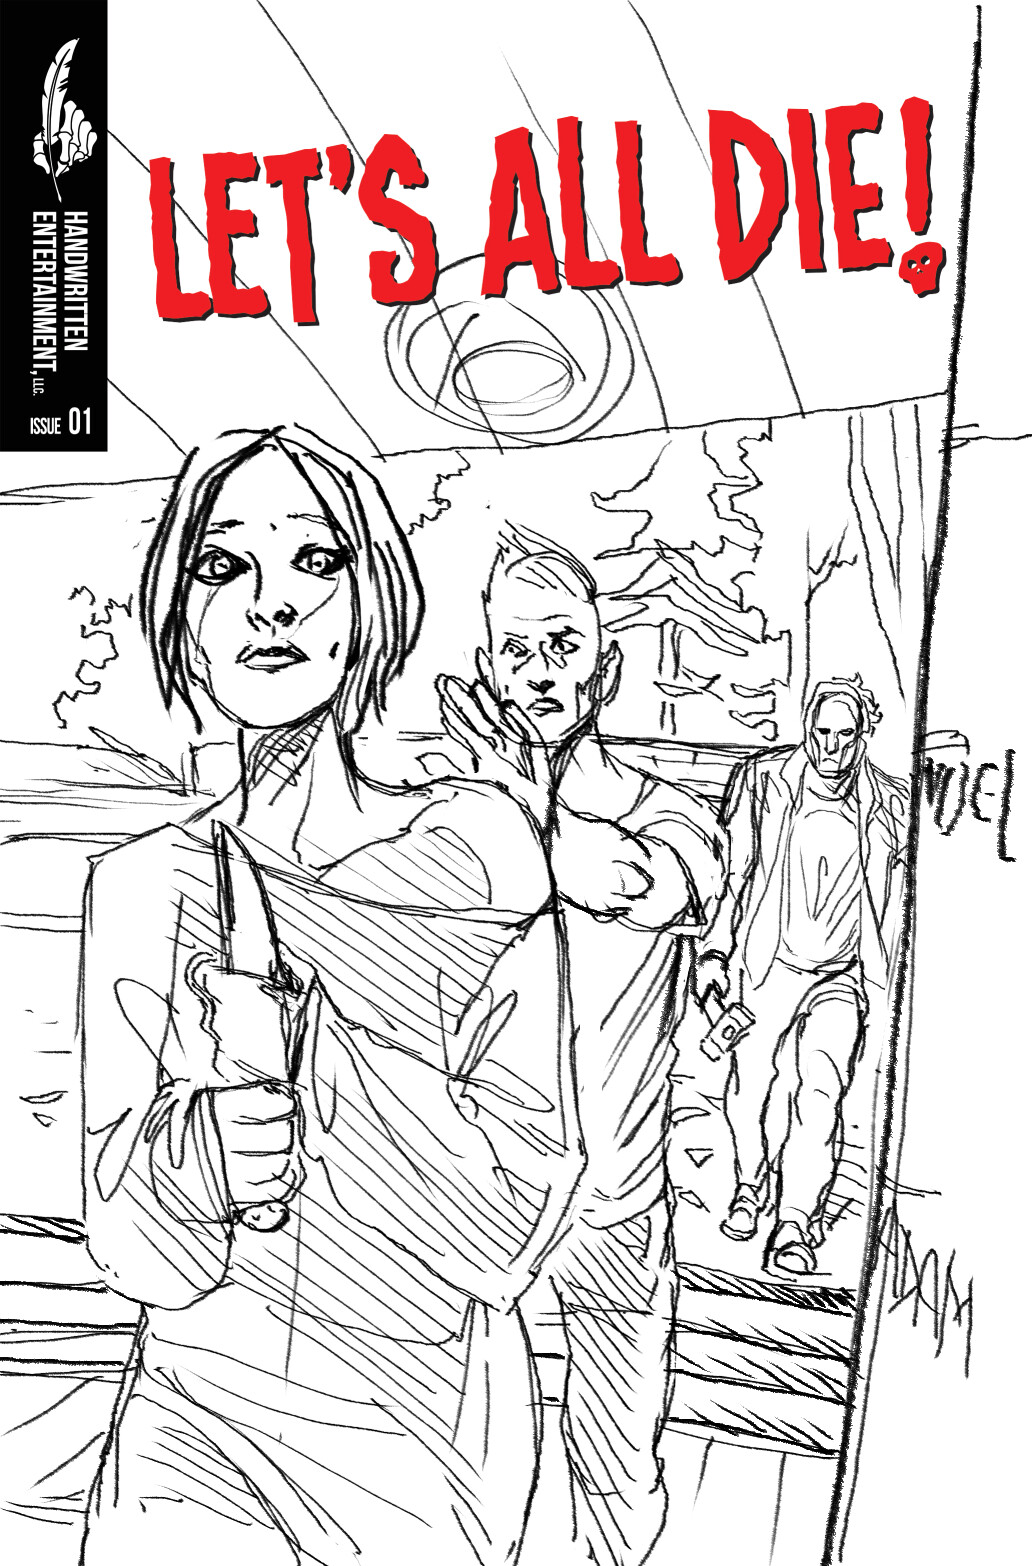 Let's All Die! #3 cover sketch (Handwritten Entertainment 2020)